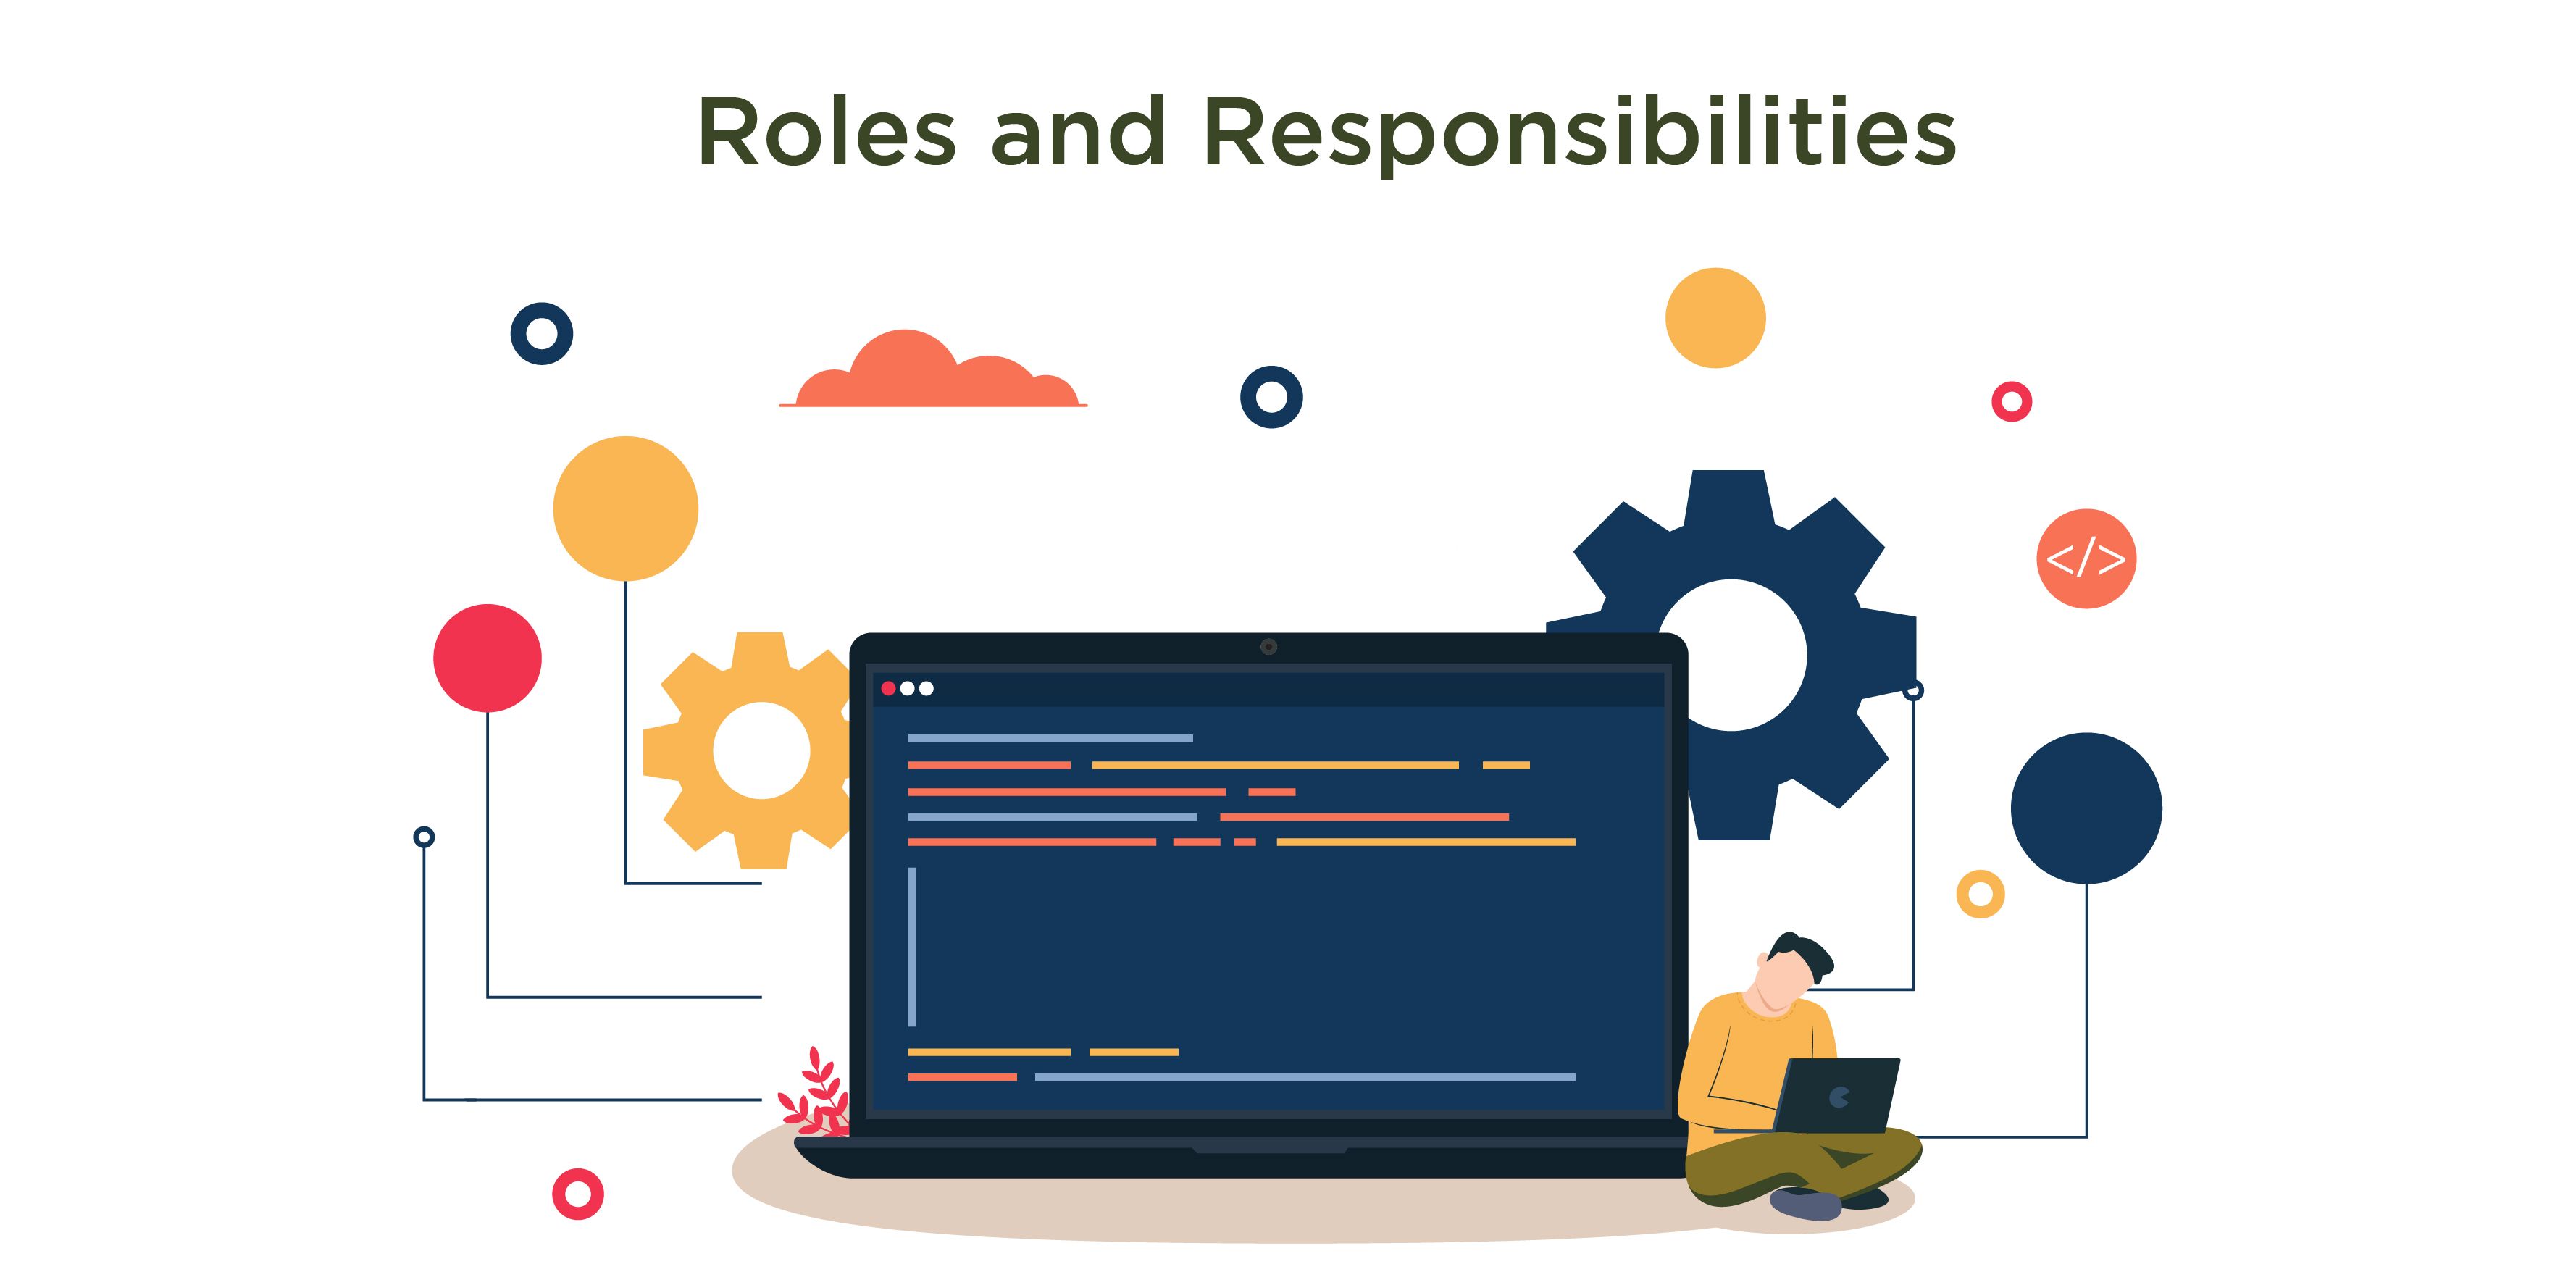 Swift developers' roles and responsibilities